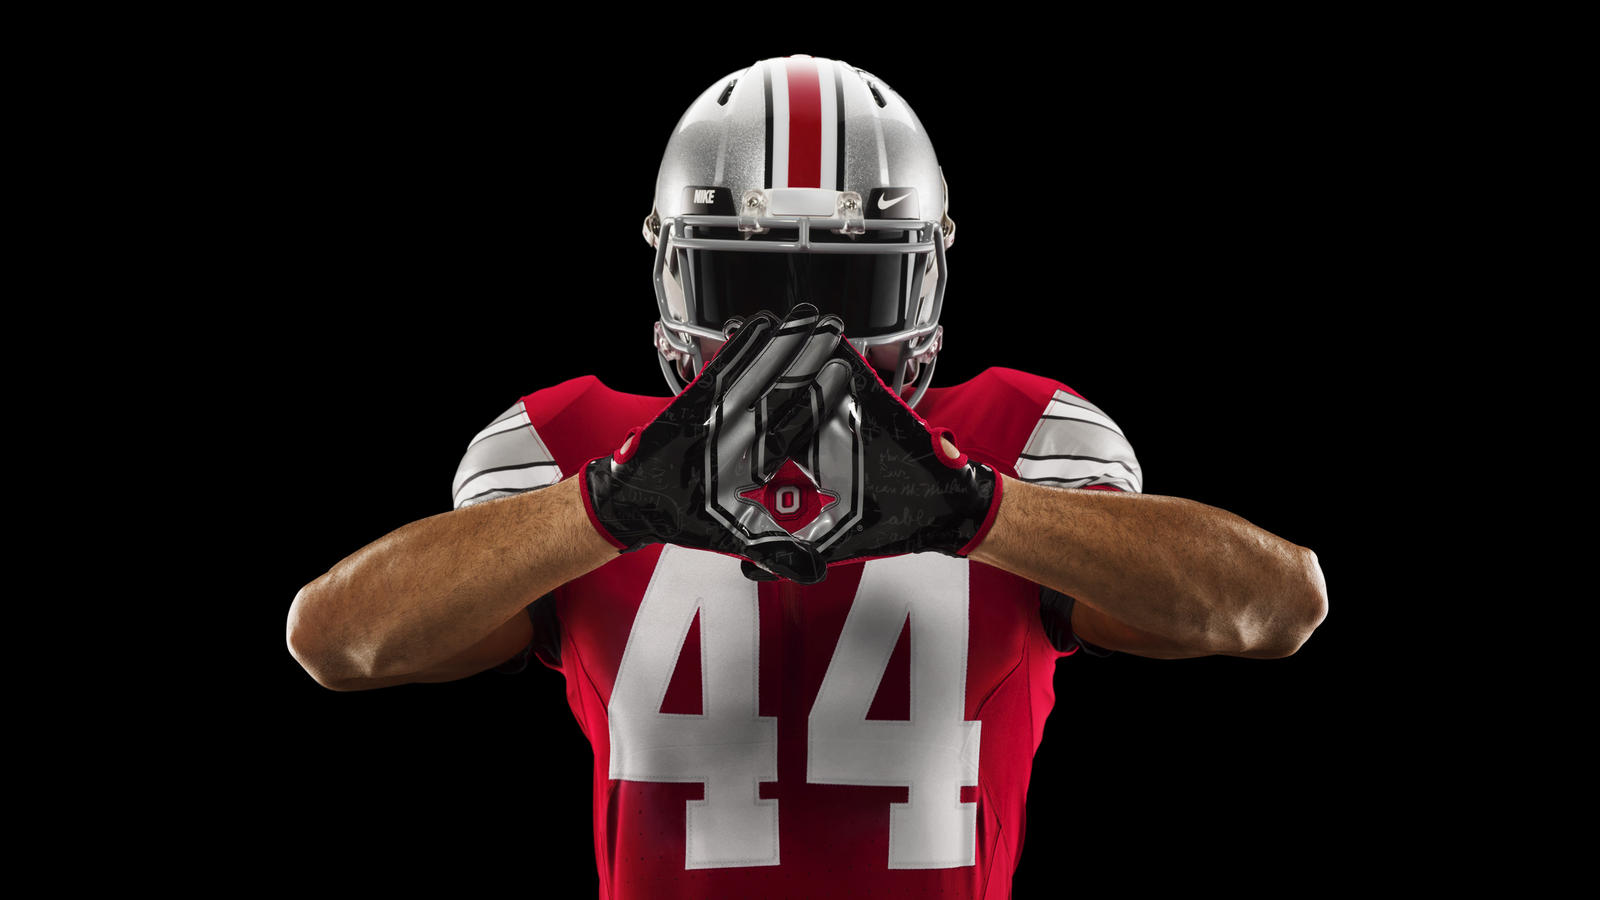 Ohio State Football Player Gloves - HD Wallpaper 